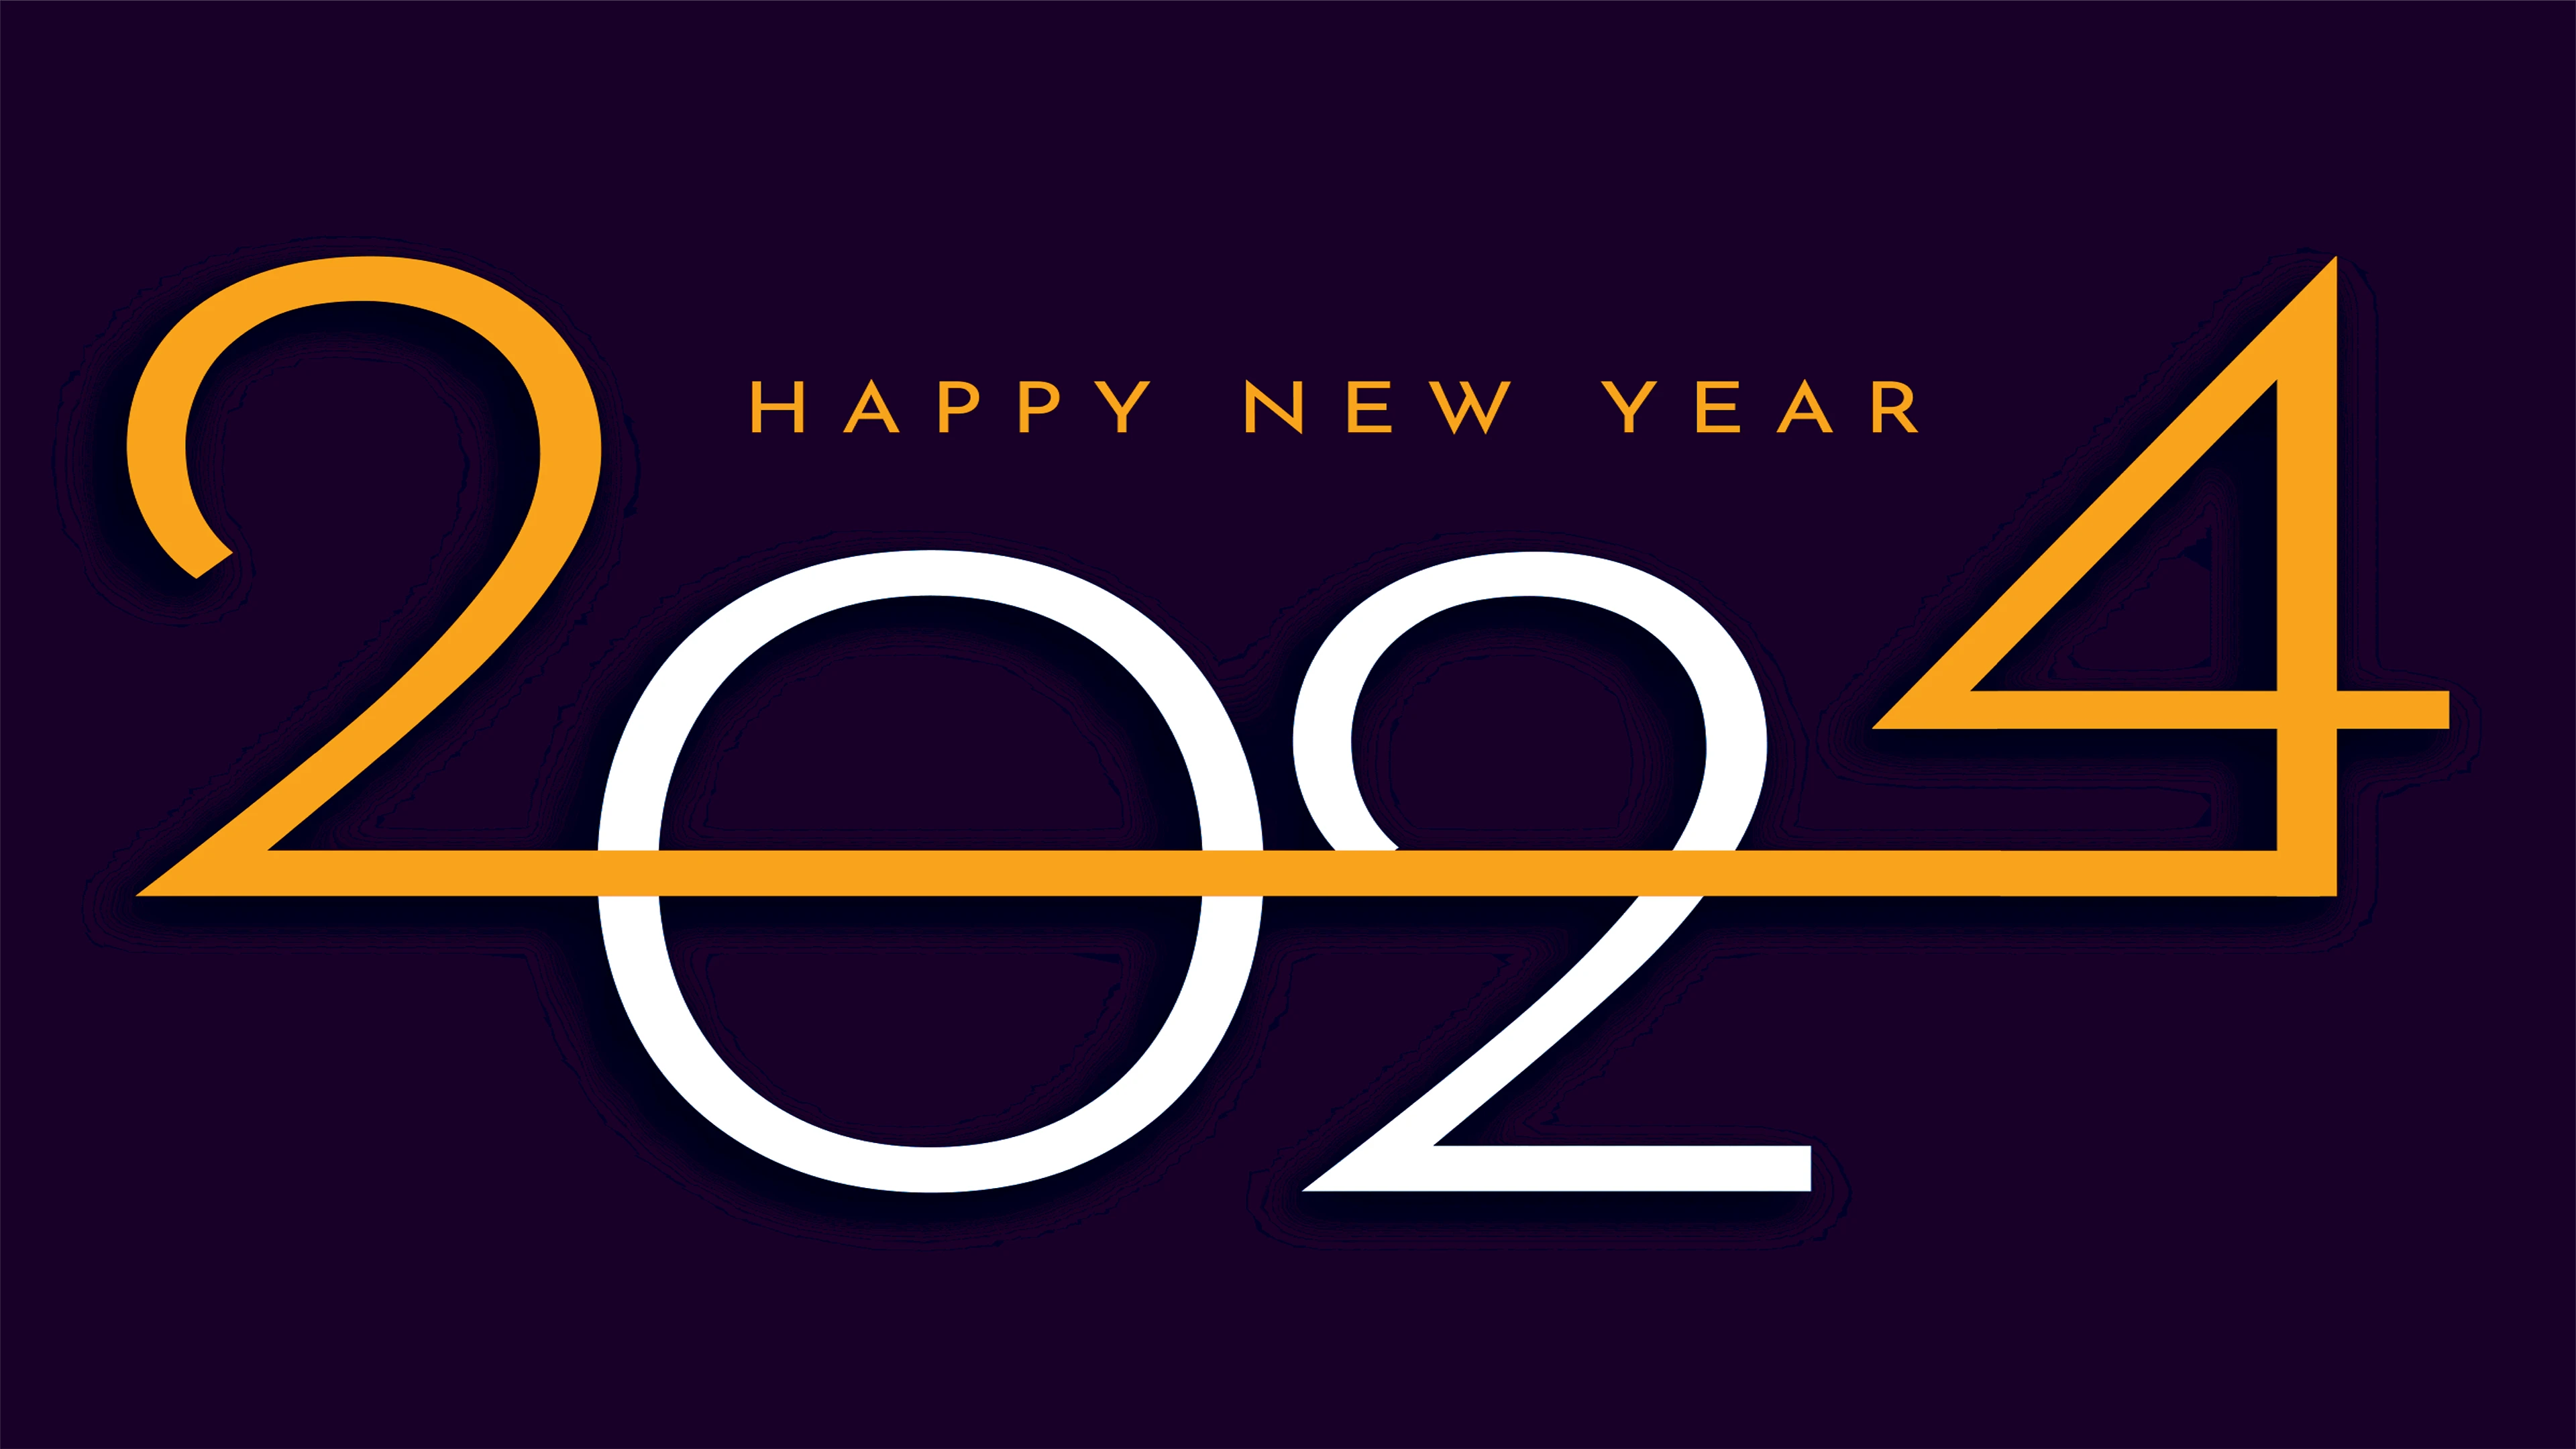 Free vector modern purple black and red yellow happy new year background design